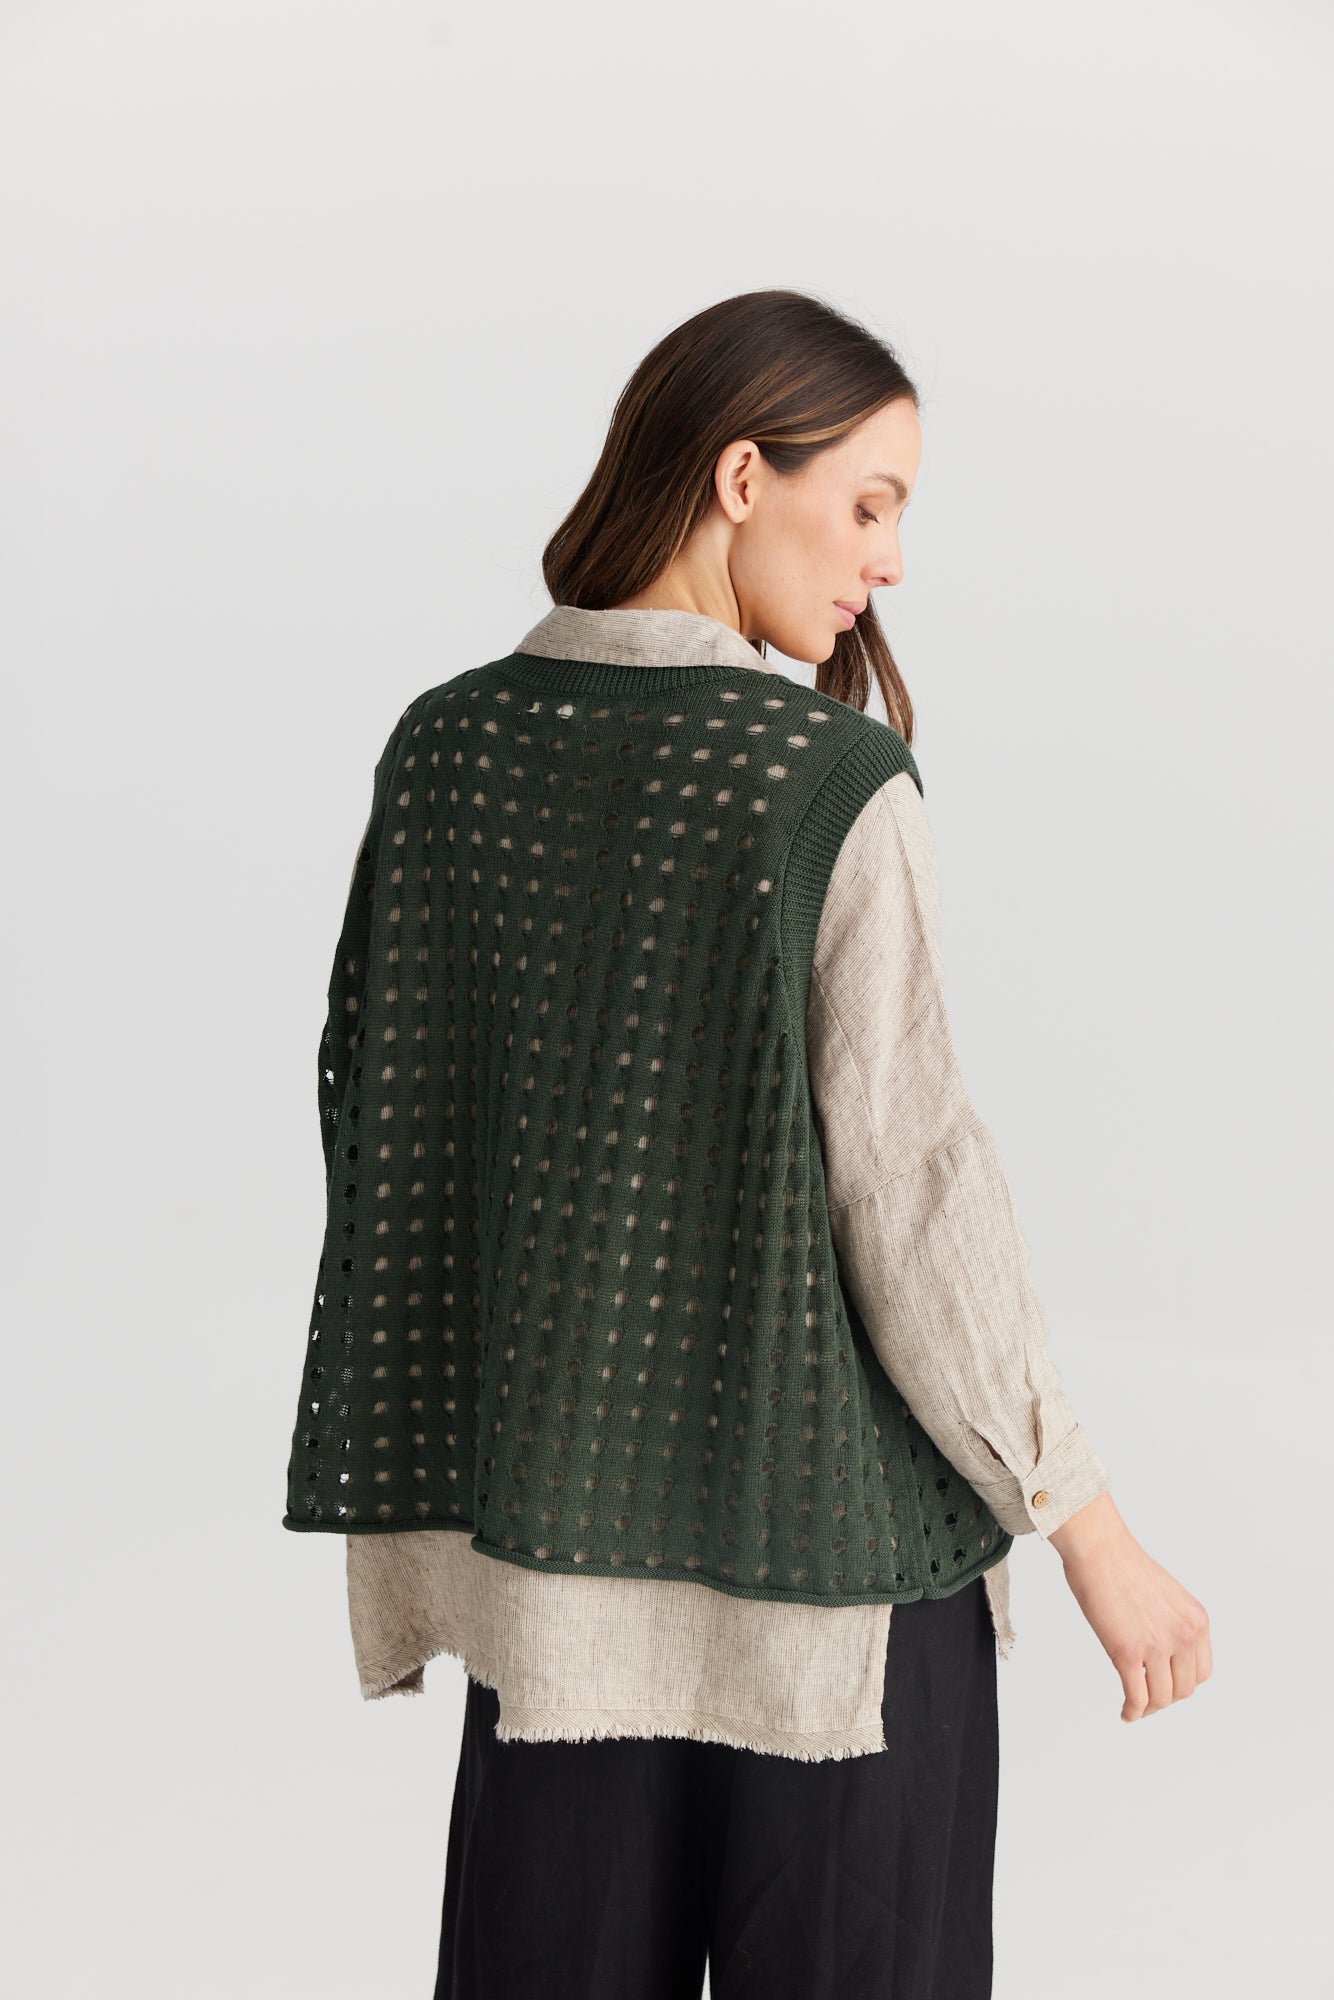 Nola Knit Vest - Forest-Knitwear & Jumpers-The Shanty Corporation-Onesize-The Bay Room